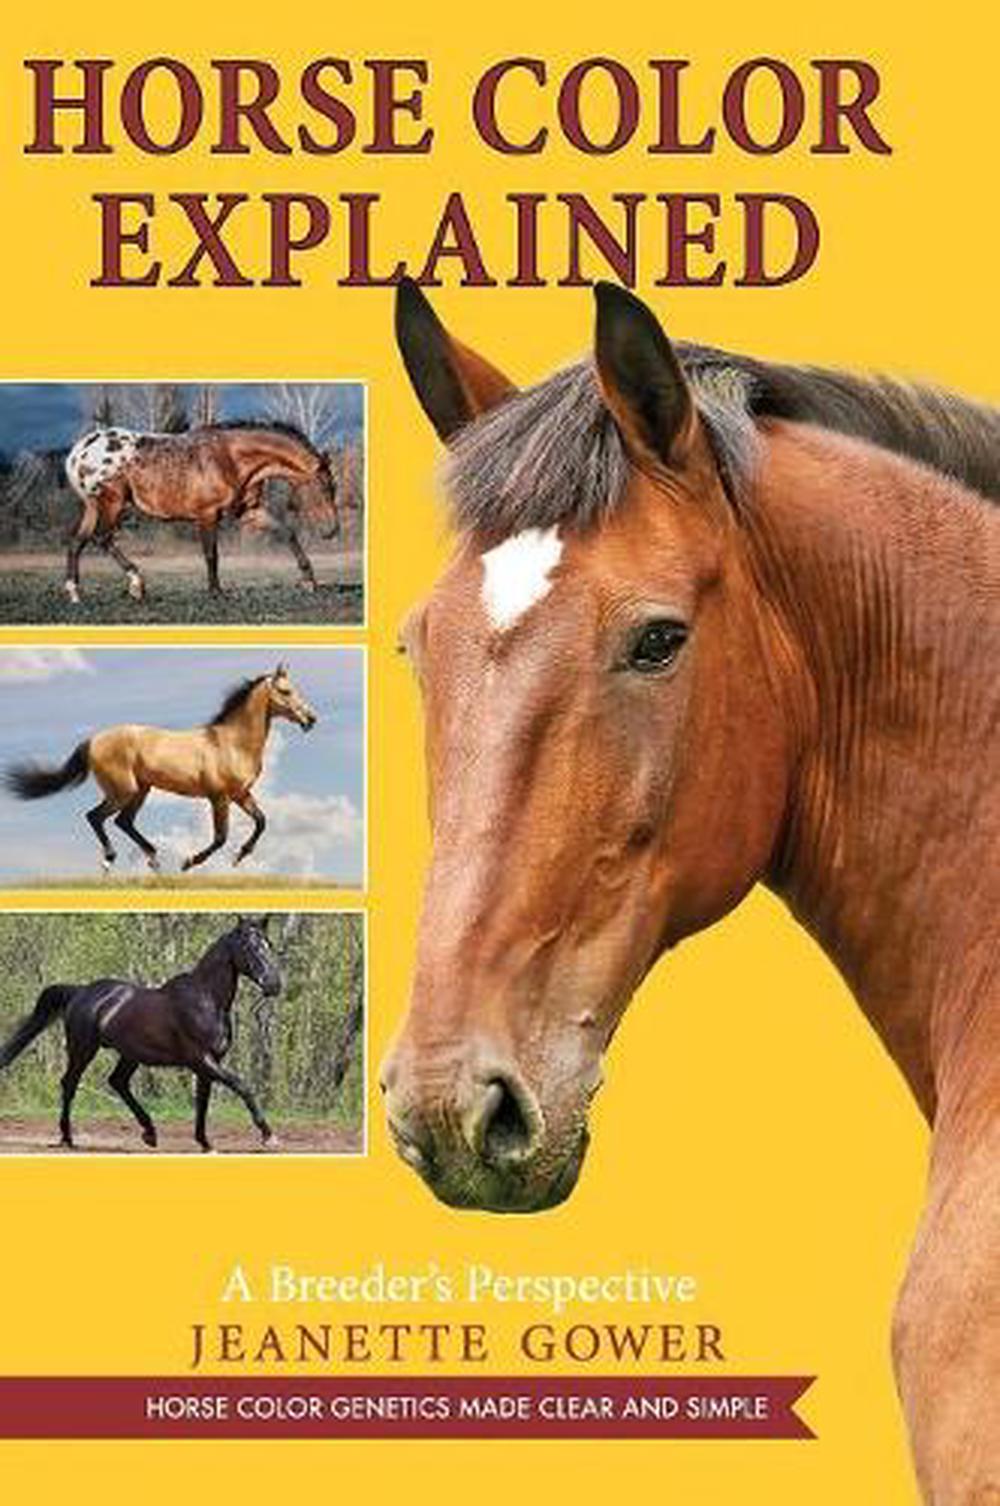 Horse Color Explained: A Breeder's Perspective by Jeanette Gower Hardcover Book  - Photo 1 sur 1